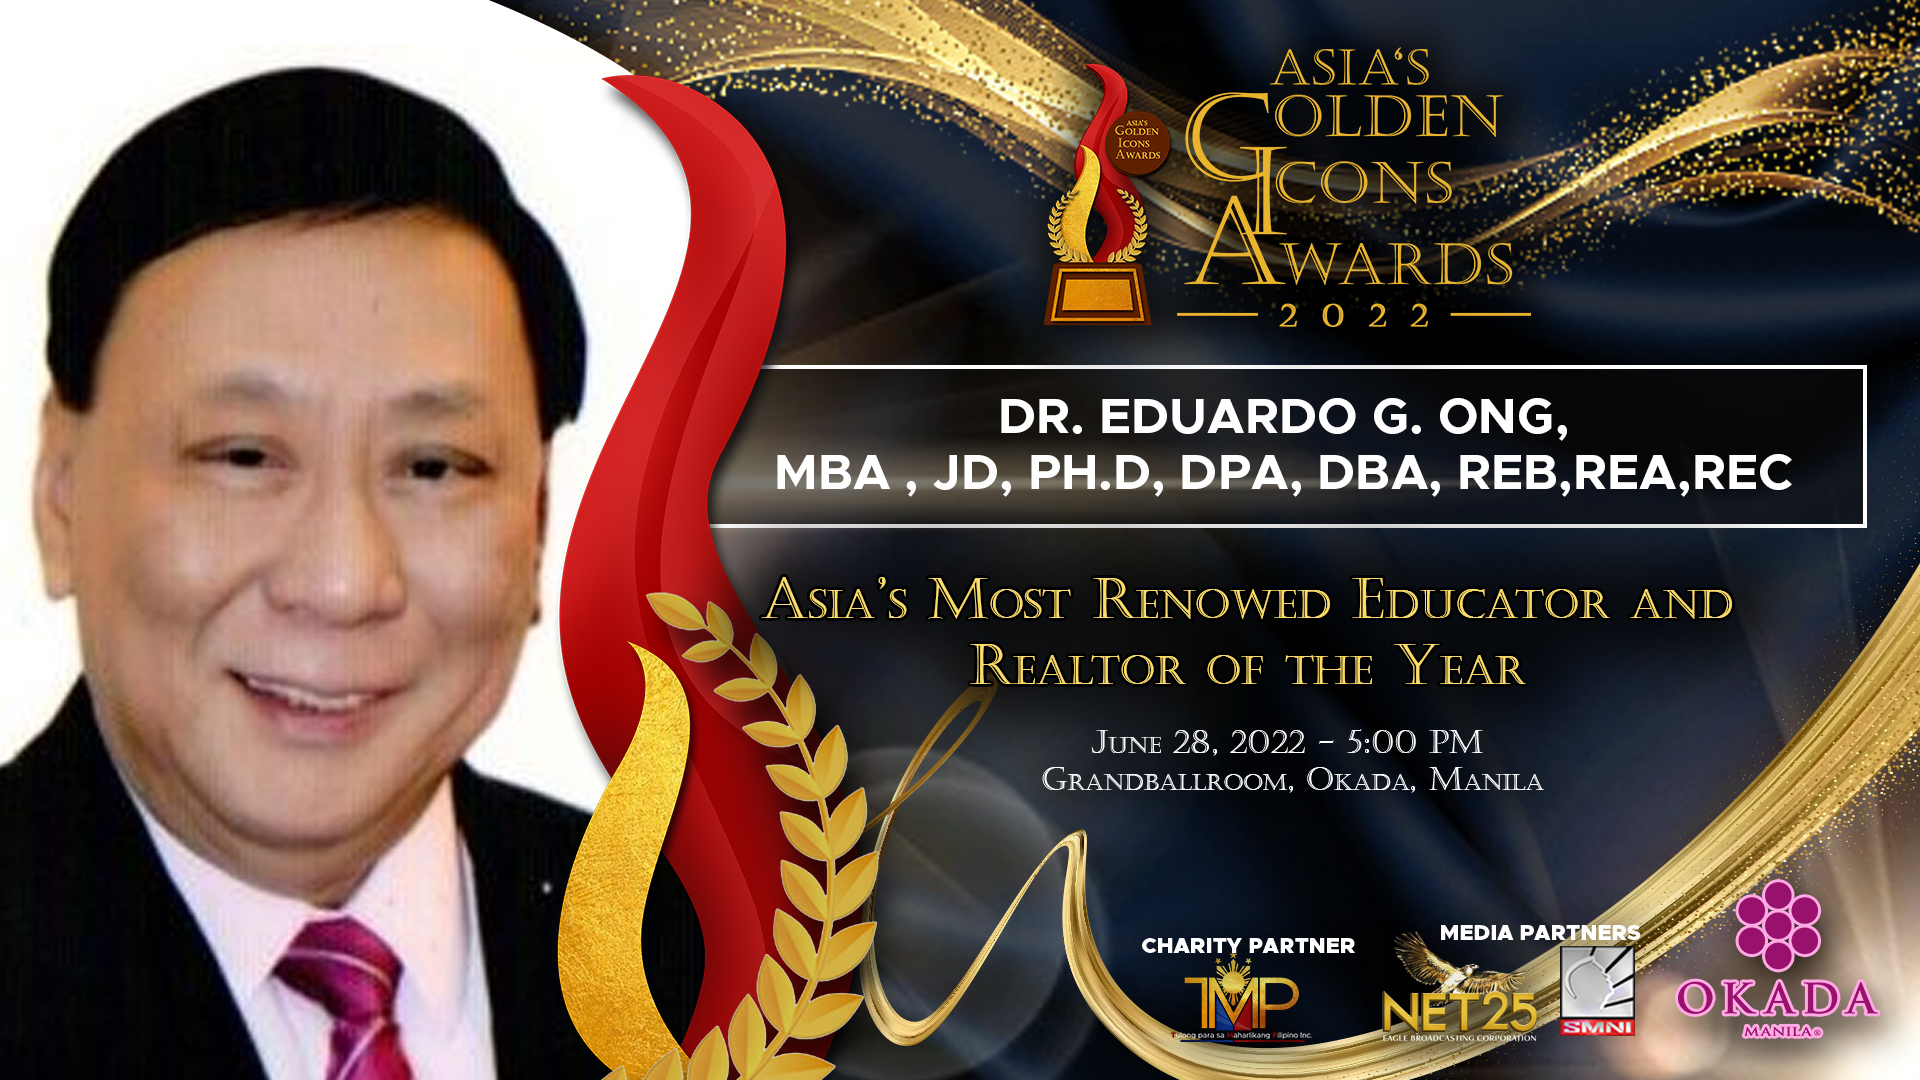 Dr. Eduardo Ong (Asia's Most Renowned Educator and Realtor of the Year)